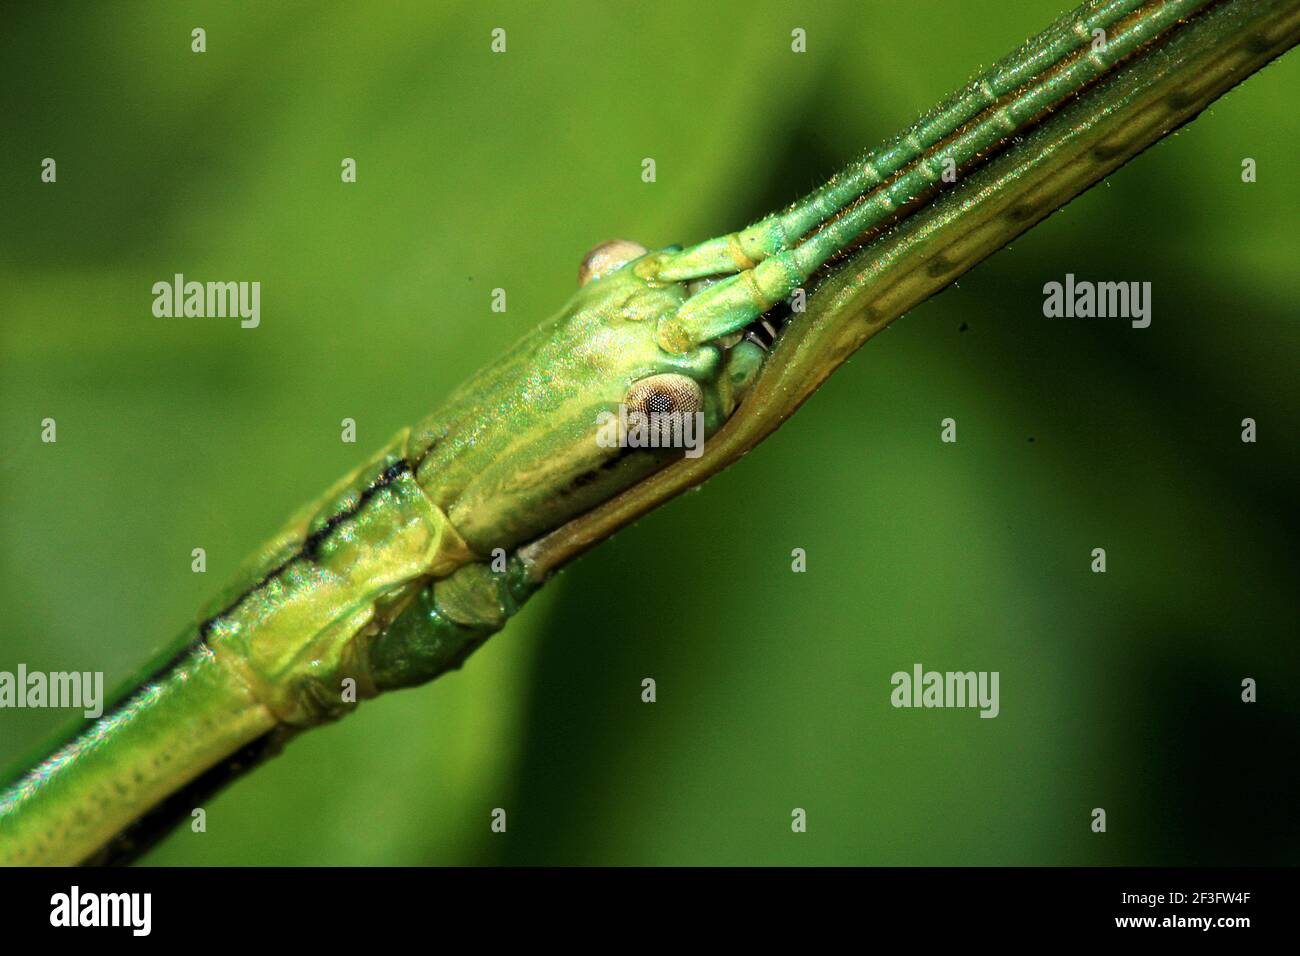 Smooth green stick insect (Clitarchus hookeri) on NZ spinach plant (Tetragonia) Stock Photo